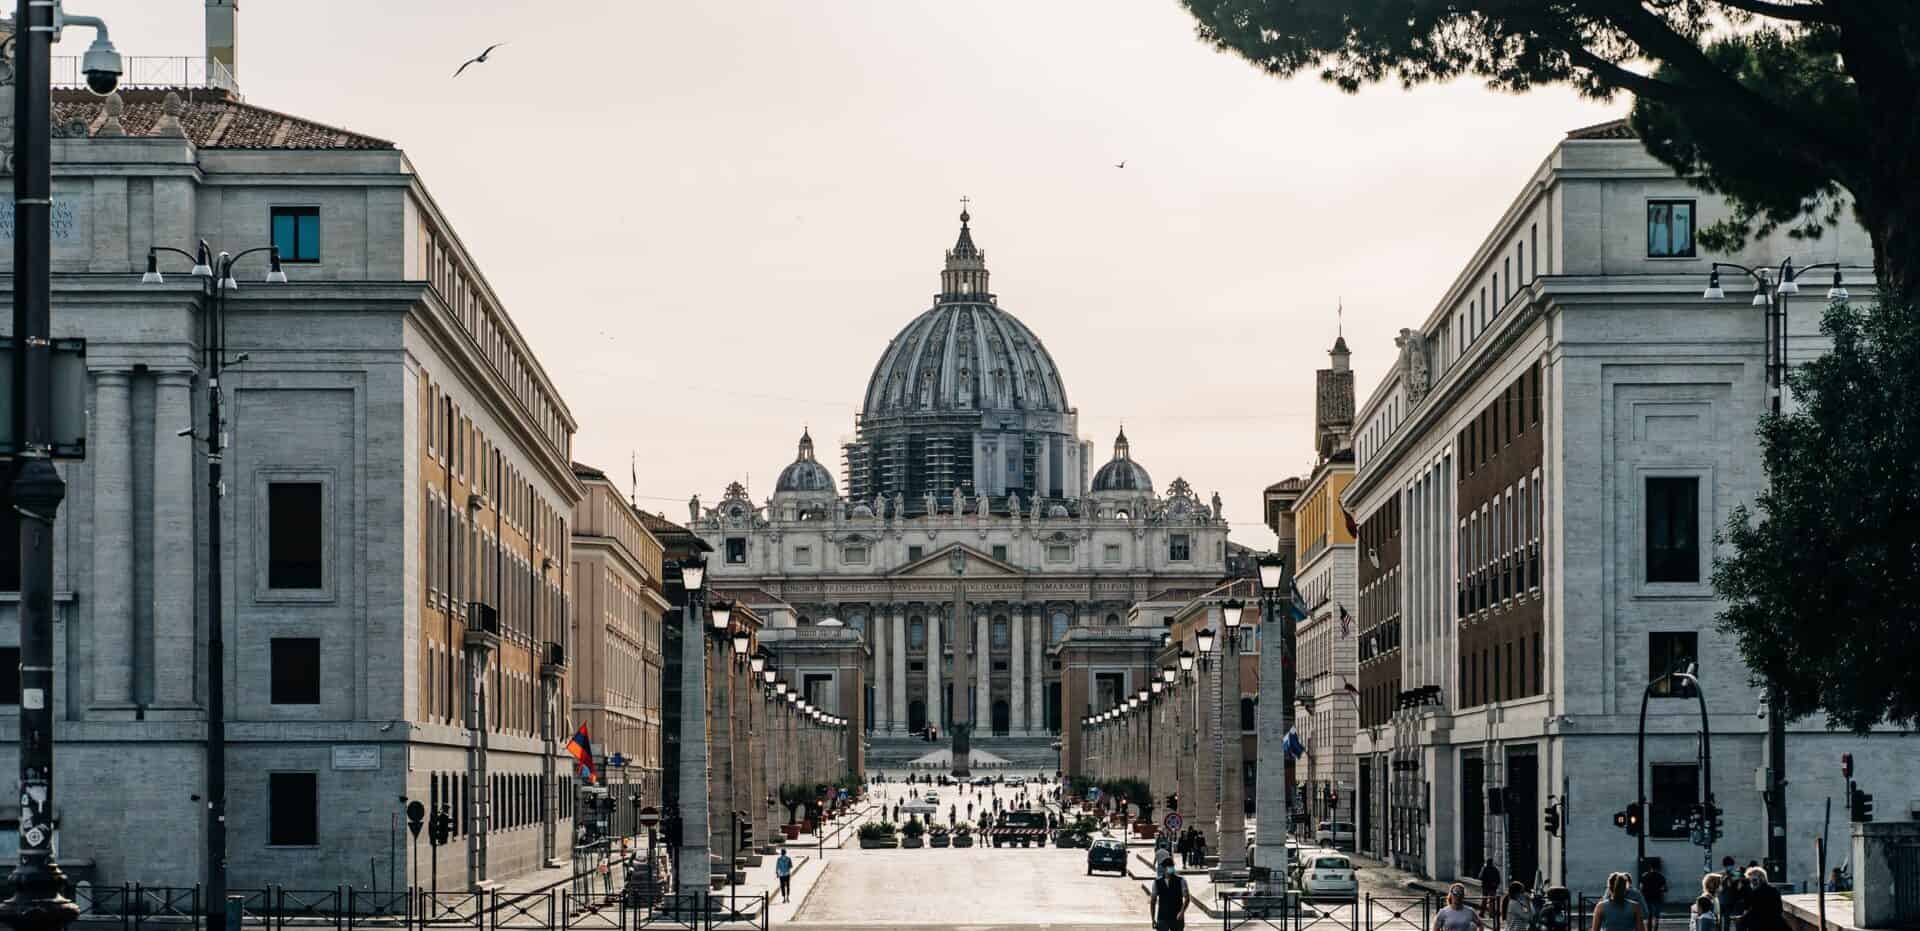 Facade of Saint Peter's Basilica from Street View